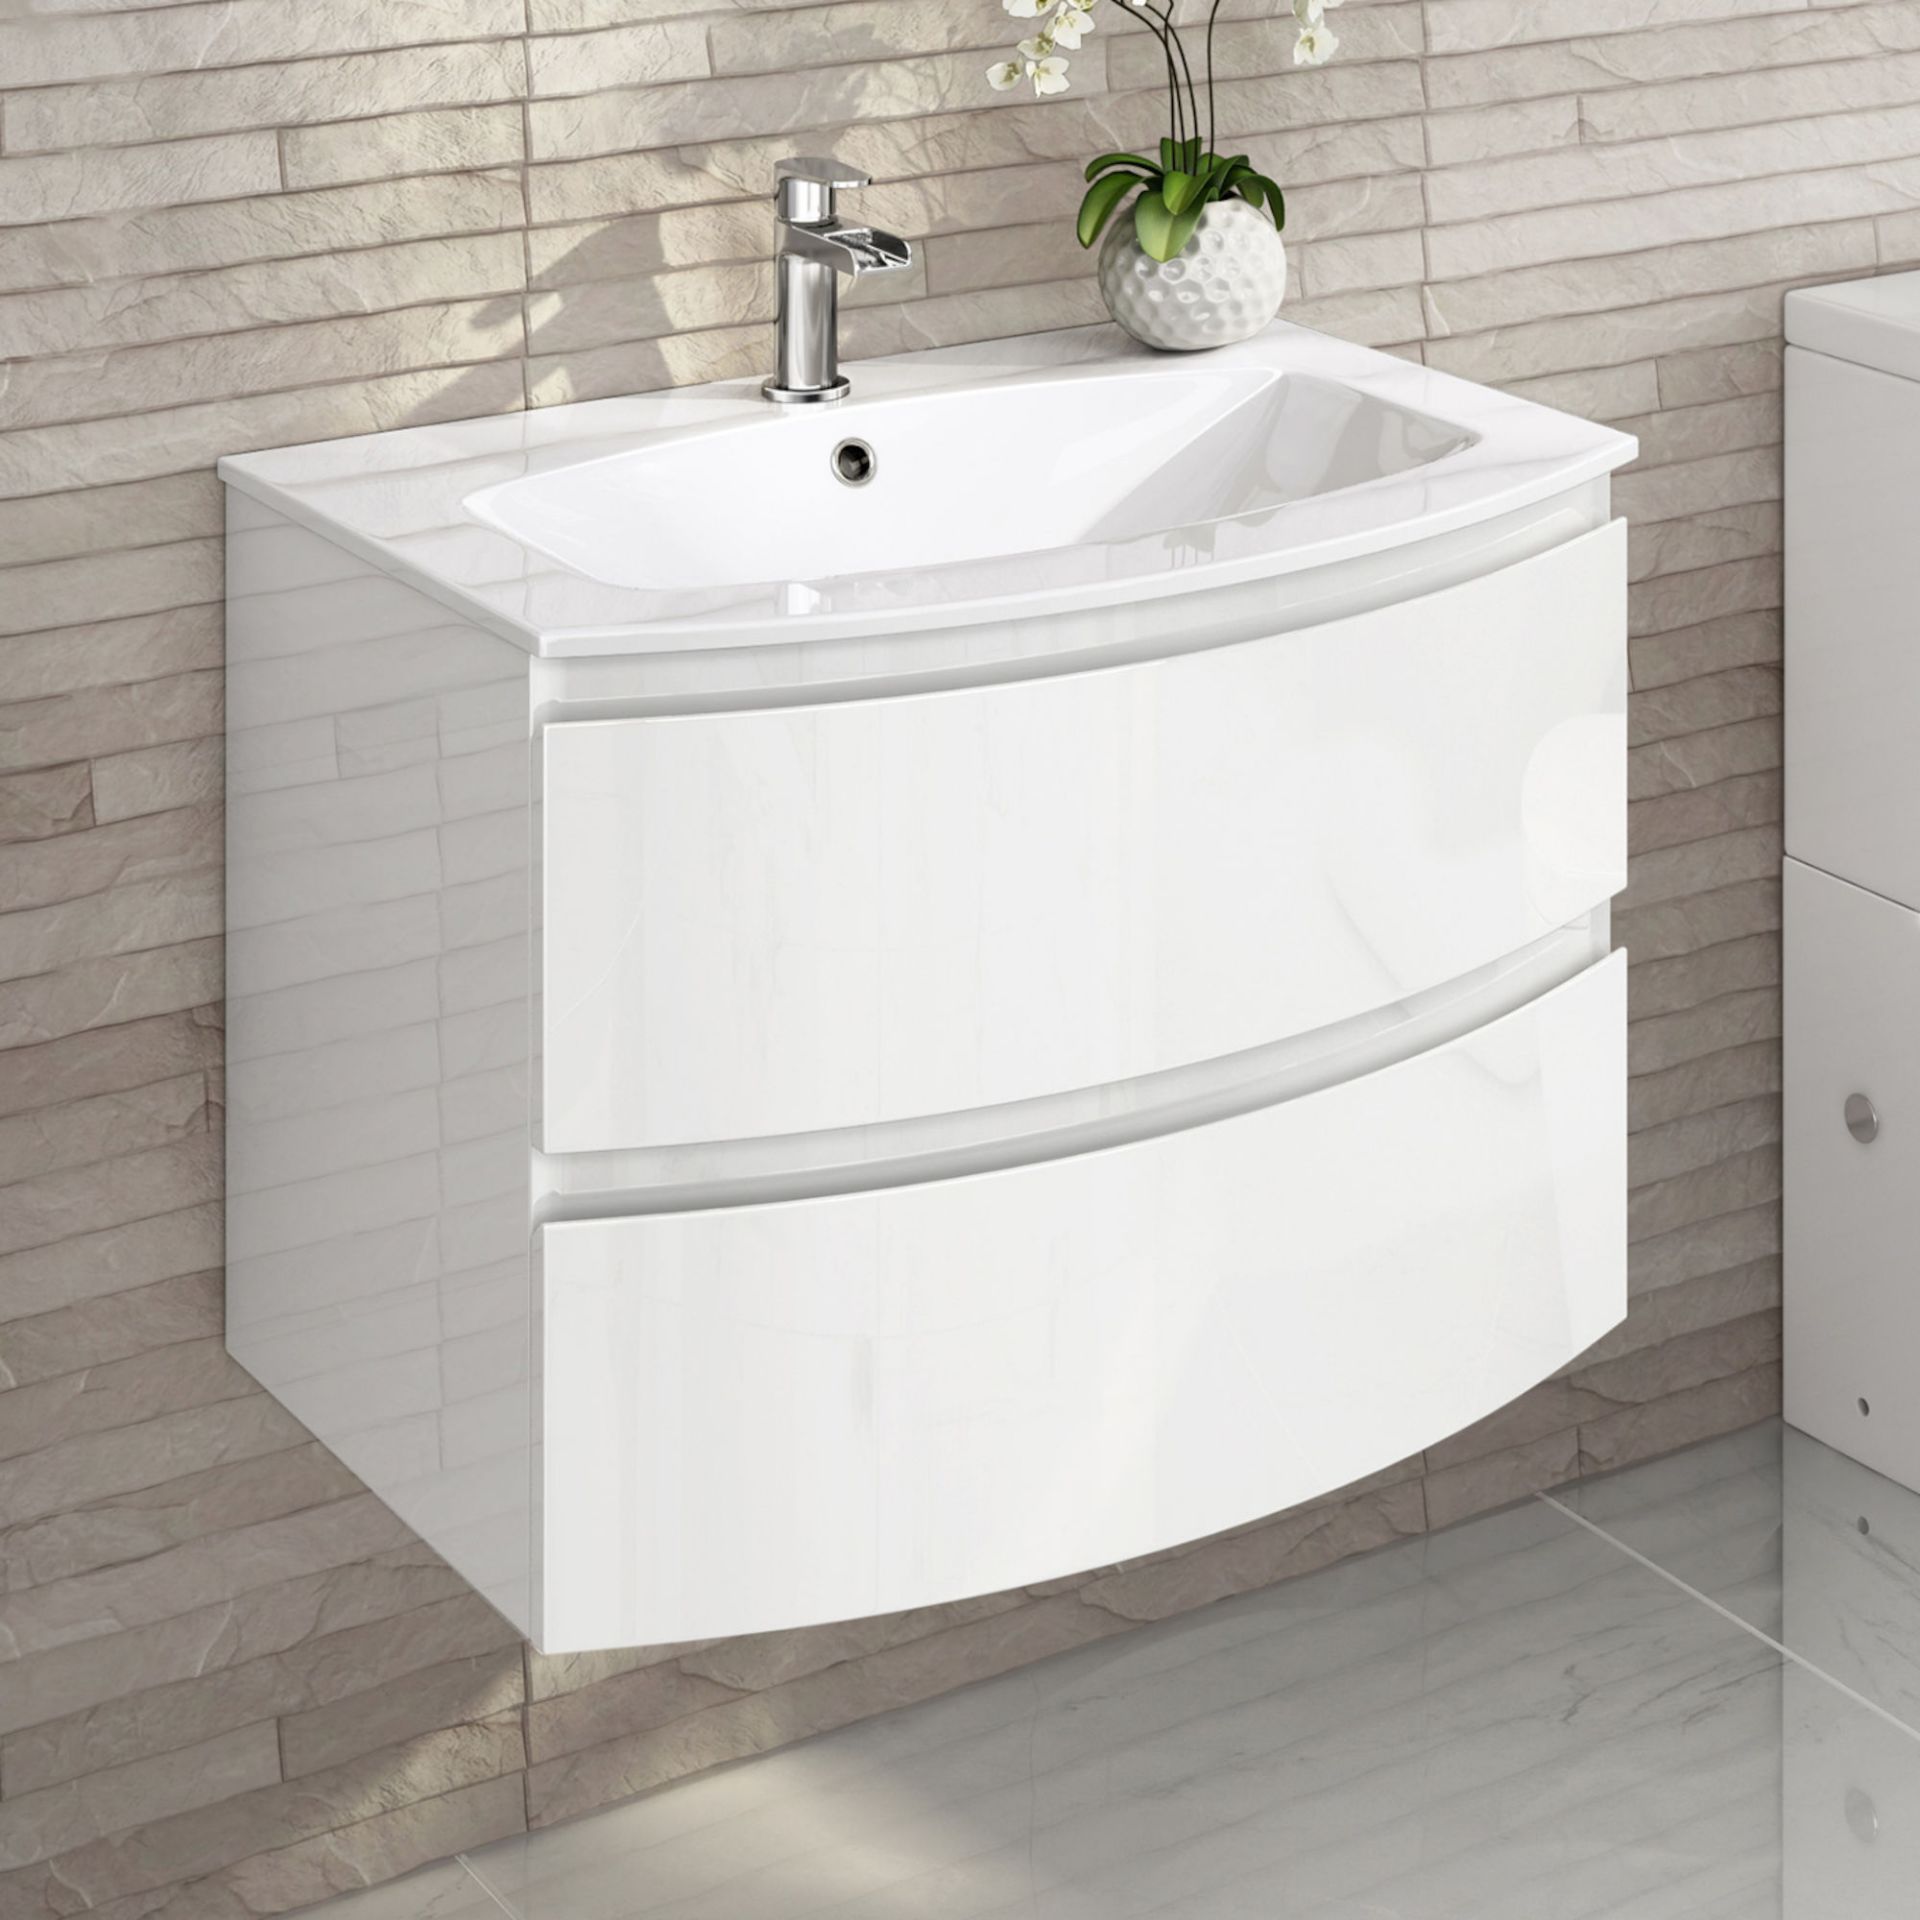 NEW & BOXED 700mm Amelie High Gloss White Curved Vanity Unit - Wall Hung. Comes complete with b...